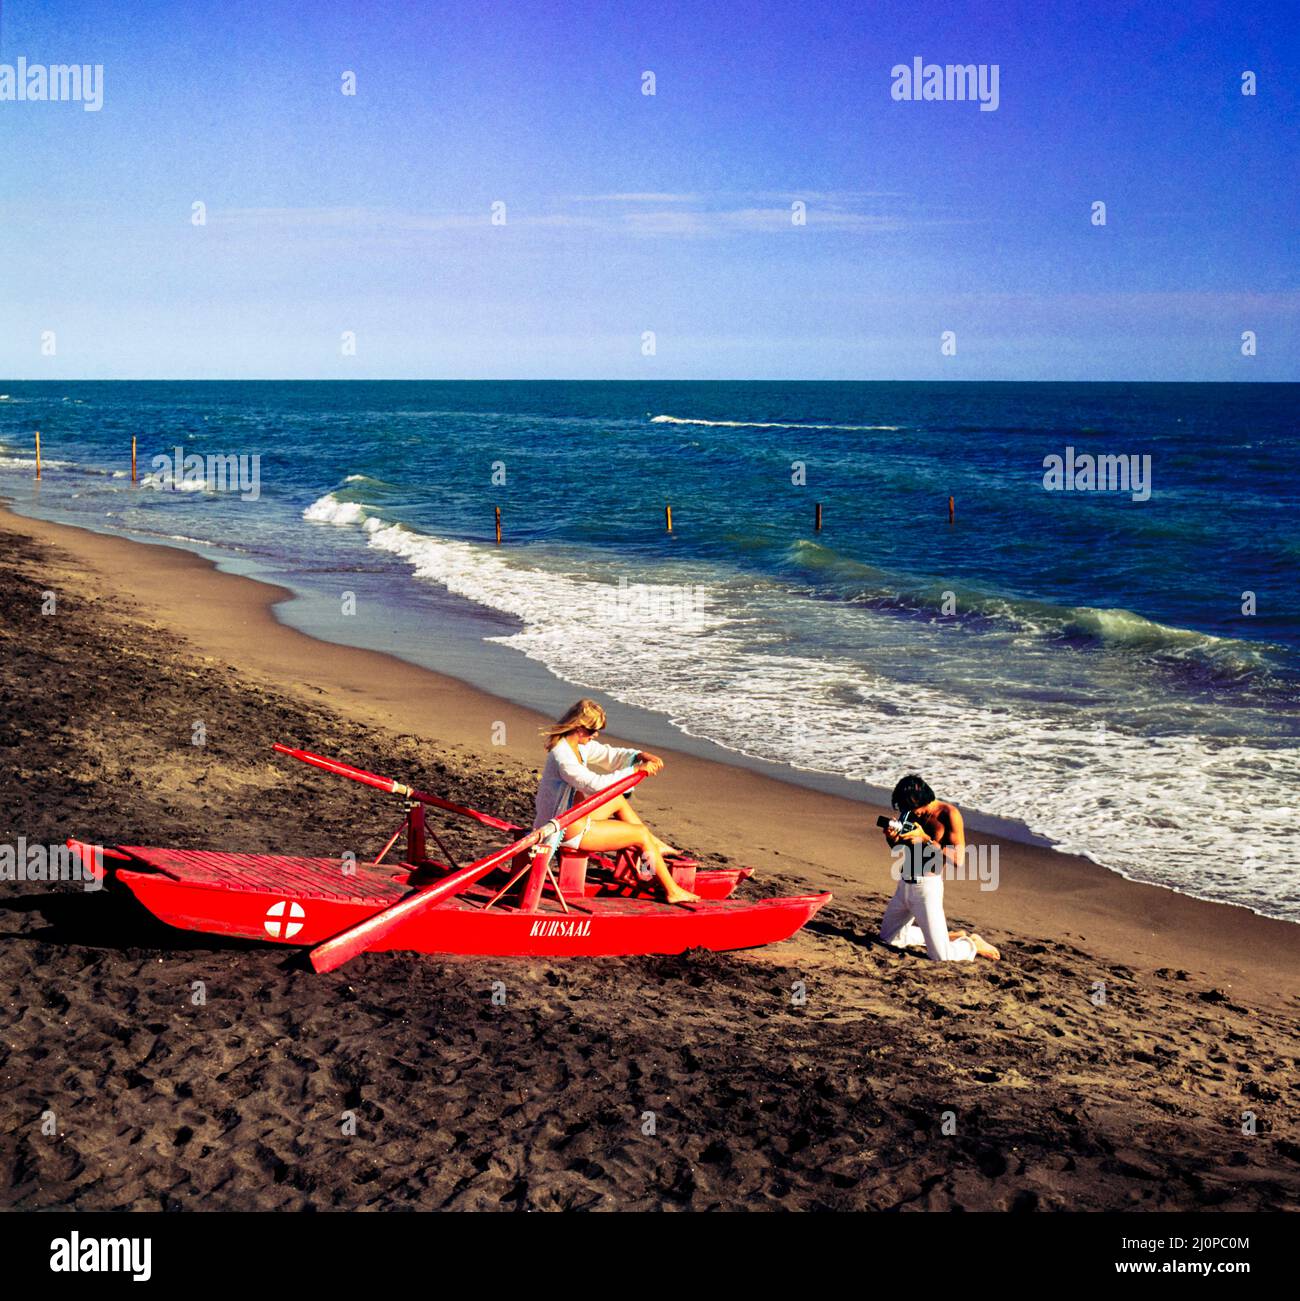 Vintage Italy 1970s, photographer shooting pictures, female fashion model, red rowing rescue boat, Kursaal beach, Lido di Ostia, Lazio, Europe, Stock Photo